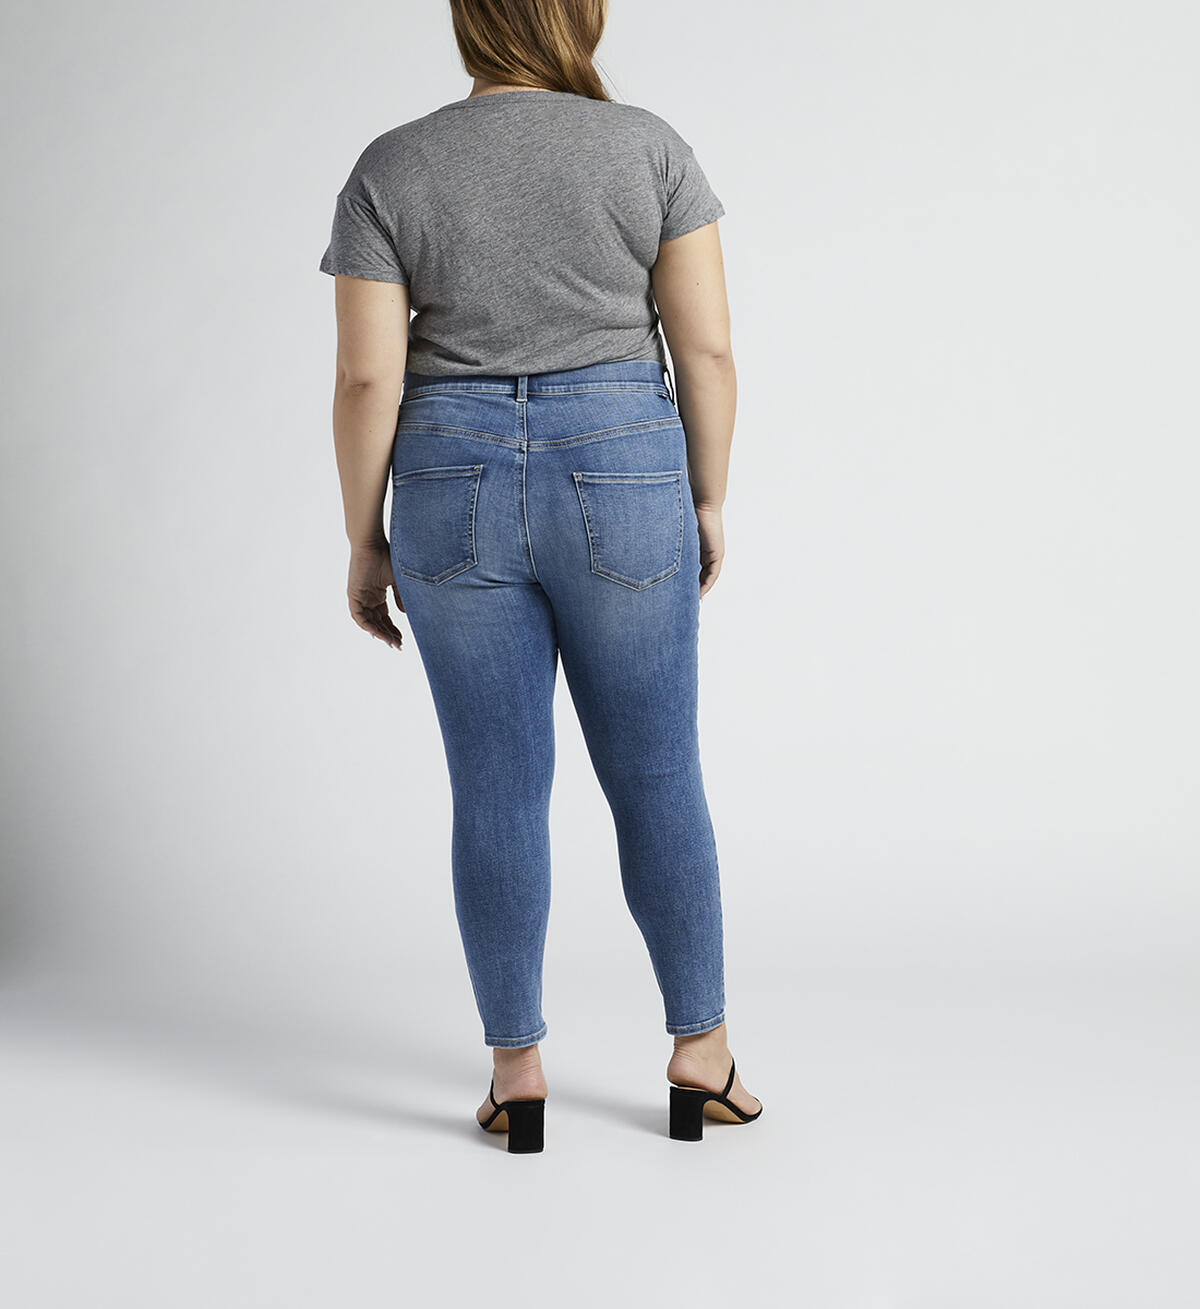 Valentina High Rise Skinny Crop Pull-On Jeans Plus Size, , hi-res image number 1